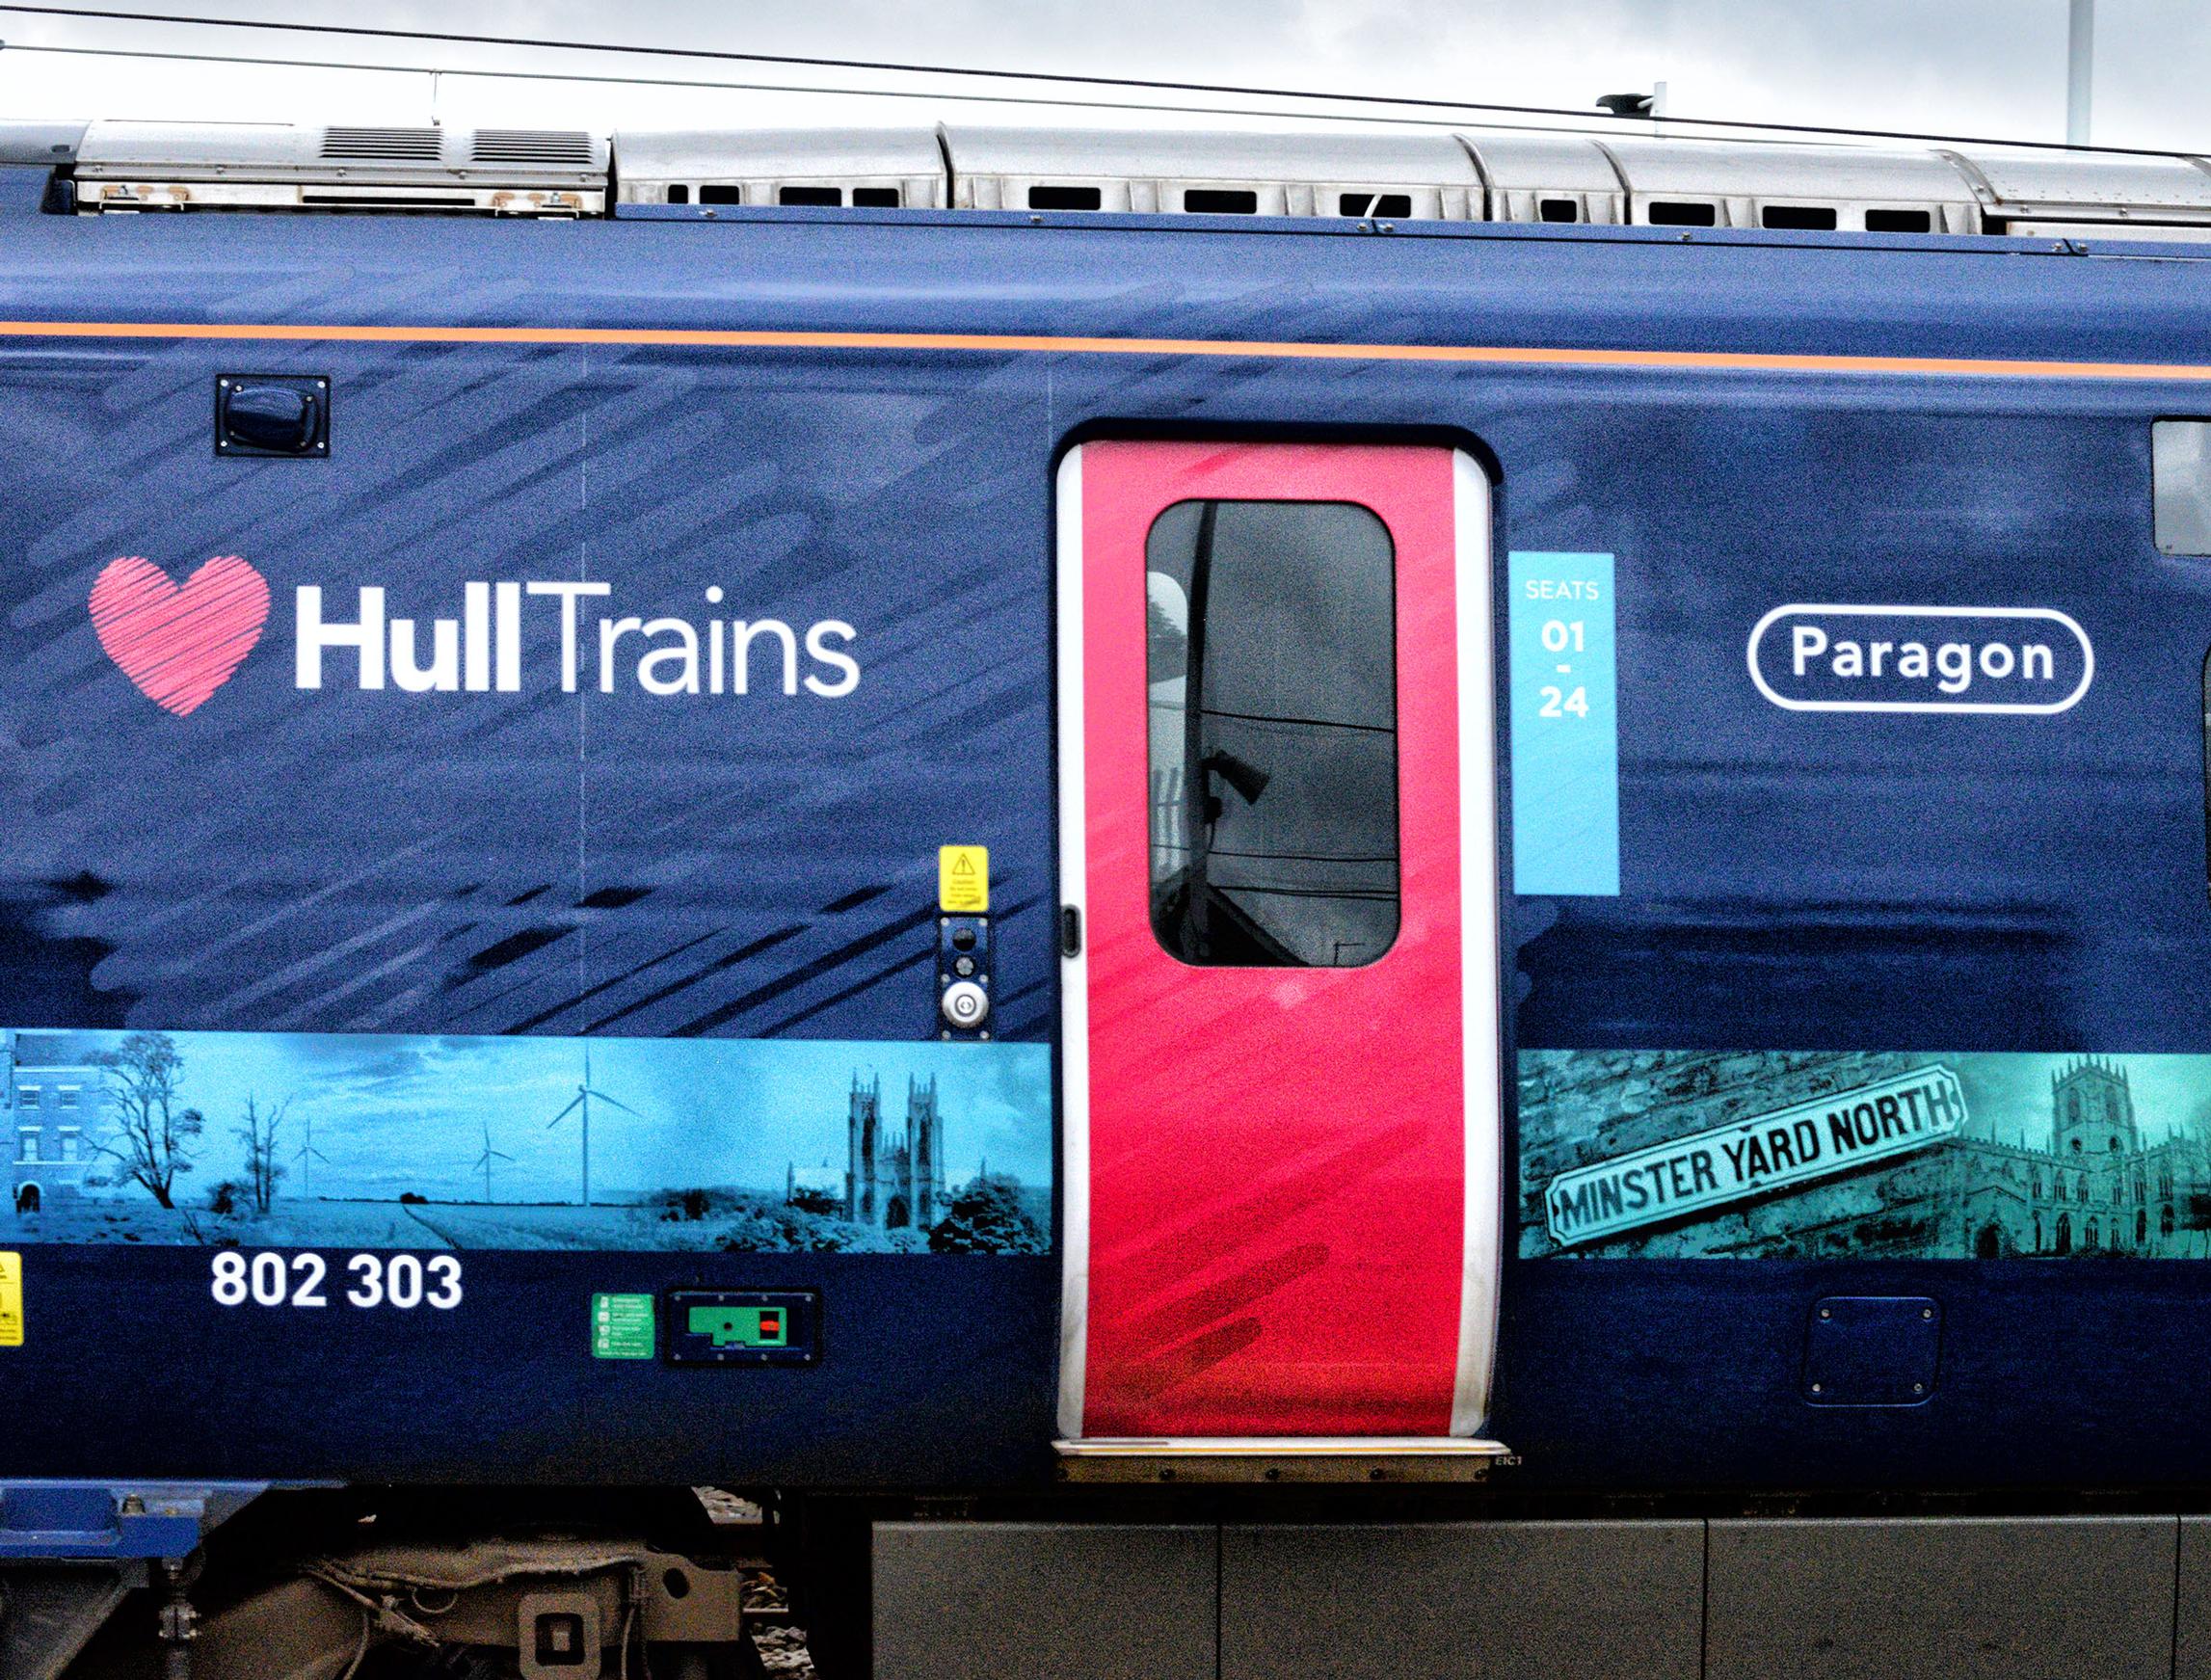 DfT has expressed concern that open access operators such as Hull Trains abstract revenue from franchised operators